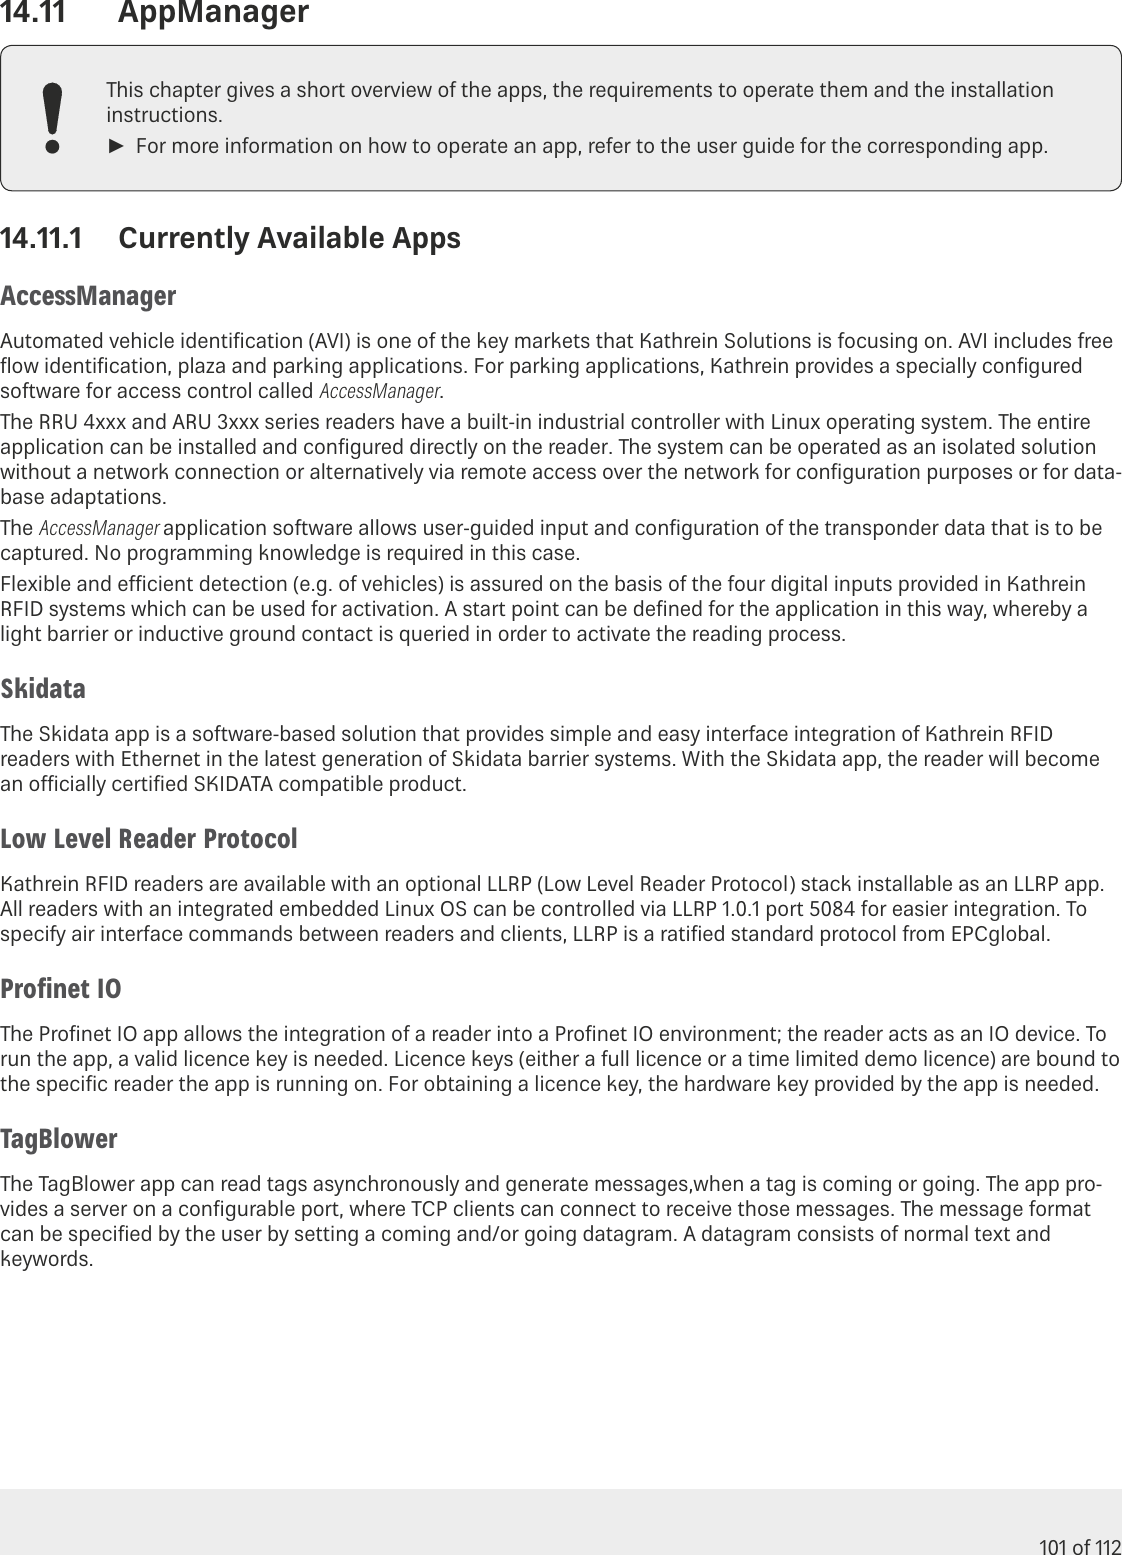 101 of 11214.11  AppManagerThis chapter gives a short overview of the apps, the requirements to operate them and the installation instructions. ►For more information on how to operate an app, refer to the user guide for the corresponding app.14.11.1  Currently Available AppsAccessManagerAutomated vehicle identiﬁcation (AVI) is one of the key markets that Kathrein Solutions is focusing on. AVI includes free ﬂow identiﬁcation, plaza and parking applications. For parking applications, Kathrein provides a specially conﬁgured software for access control called AccessManager.The RRU 4xxx and ARU 3xxx series readers have a built-in industrial controller with Linux operating system. The entire application can be installed and conﬁgured directly on the reader. The system can be operated as an isolated solution without a network connection or alternatively via remote access over the network for conﬁguration purposes or for data-base adaptations.The AccessManager application software allows user-guided input and conﬁguration of the transponder data that is to be captured. No programming knowledge is required in this case.Flexible and ecient detection (e.g. of vehicles) is assured on the basis of the four digital inputs provided in Kathrein RFID systems which can be used for activation. A start point can be deﬁned for the application in this way, whereby a light barrier or inductive ground contact is queried in order to activate the reading process.SkidataThe Skidata app is a software-based solution that provides simple and easy interface integration of Kathrein RFID readers with Ethernet in the latest generation of Skidata barrier systems. With the Skidata app, the reader will become an ocially certiﬁed SKIDATA compatible product.Low Level Reader ProtocolKathrein RFID readers are available with an optional LLRP (Low Level Reader Protocol) stack installable as an LLRP app. All readers with an integrated embedded Linux OS can be controlled via LLRP 1.0.1 port 5084 for easier integration. To specify air interface commands between readers and clients, LLRP is a ratiﬁed standard protocol from EPCglobal.Proﬁnet IOThe Proﬁnet IO app allows the integration of a reader into a Proﬁnet IO environment; the reader acts as an IO device. To run the app, a valid licence key is needed. Licence keys (either a full licence or a time limited demo licence) are bound to the speciﬁc reader the app is running on. For obtaining a licence key, the hardware key provided by the app is needed.TagBlowerThe TagBlower app can read tags asynchronously and generate messages,when a tag is coming or going. The app pro-vides a server on a conﬁgurable port, where TCP clients can connect to receive those messages. The message format can be speciﬁed by the user by setting a coming and/or going datagram. A datagram consists of normal text and keywords.